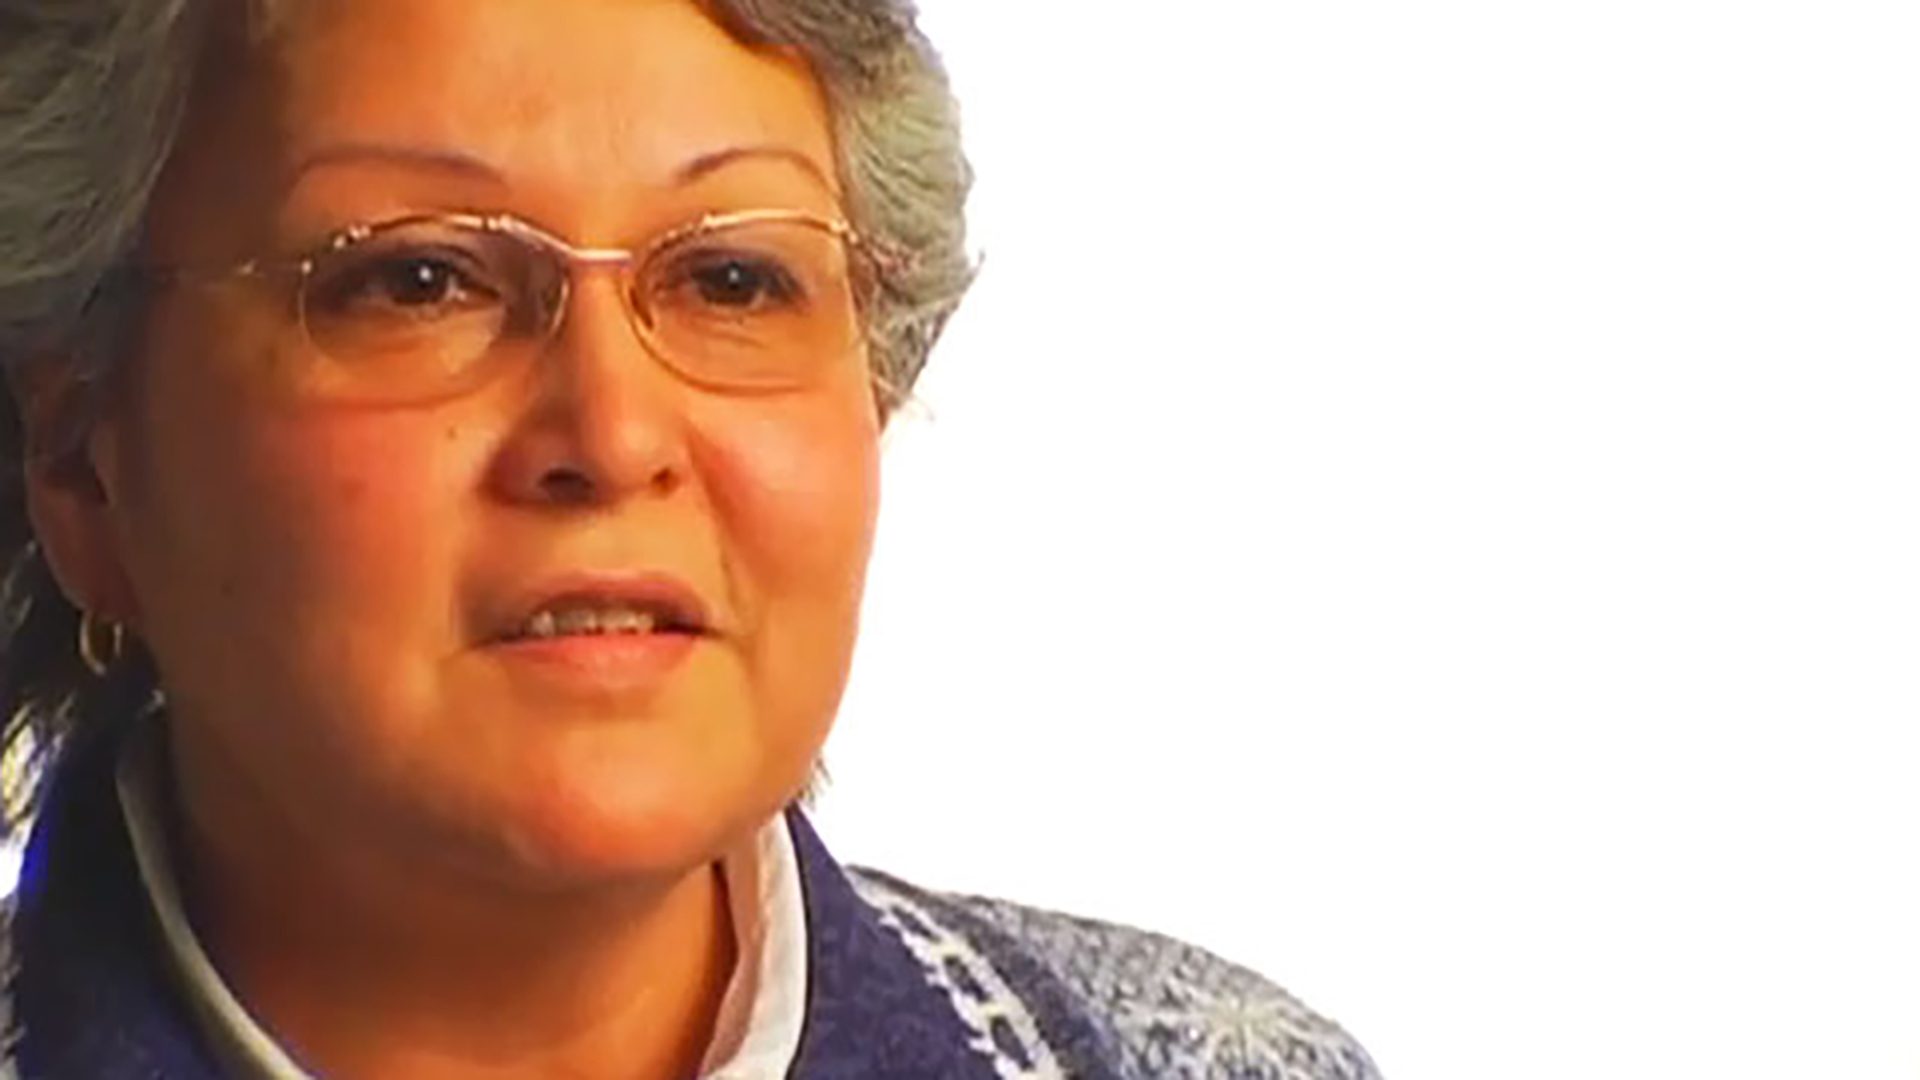 A senior woman with short gray hair and glasses is interviewed against a white background